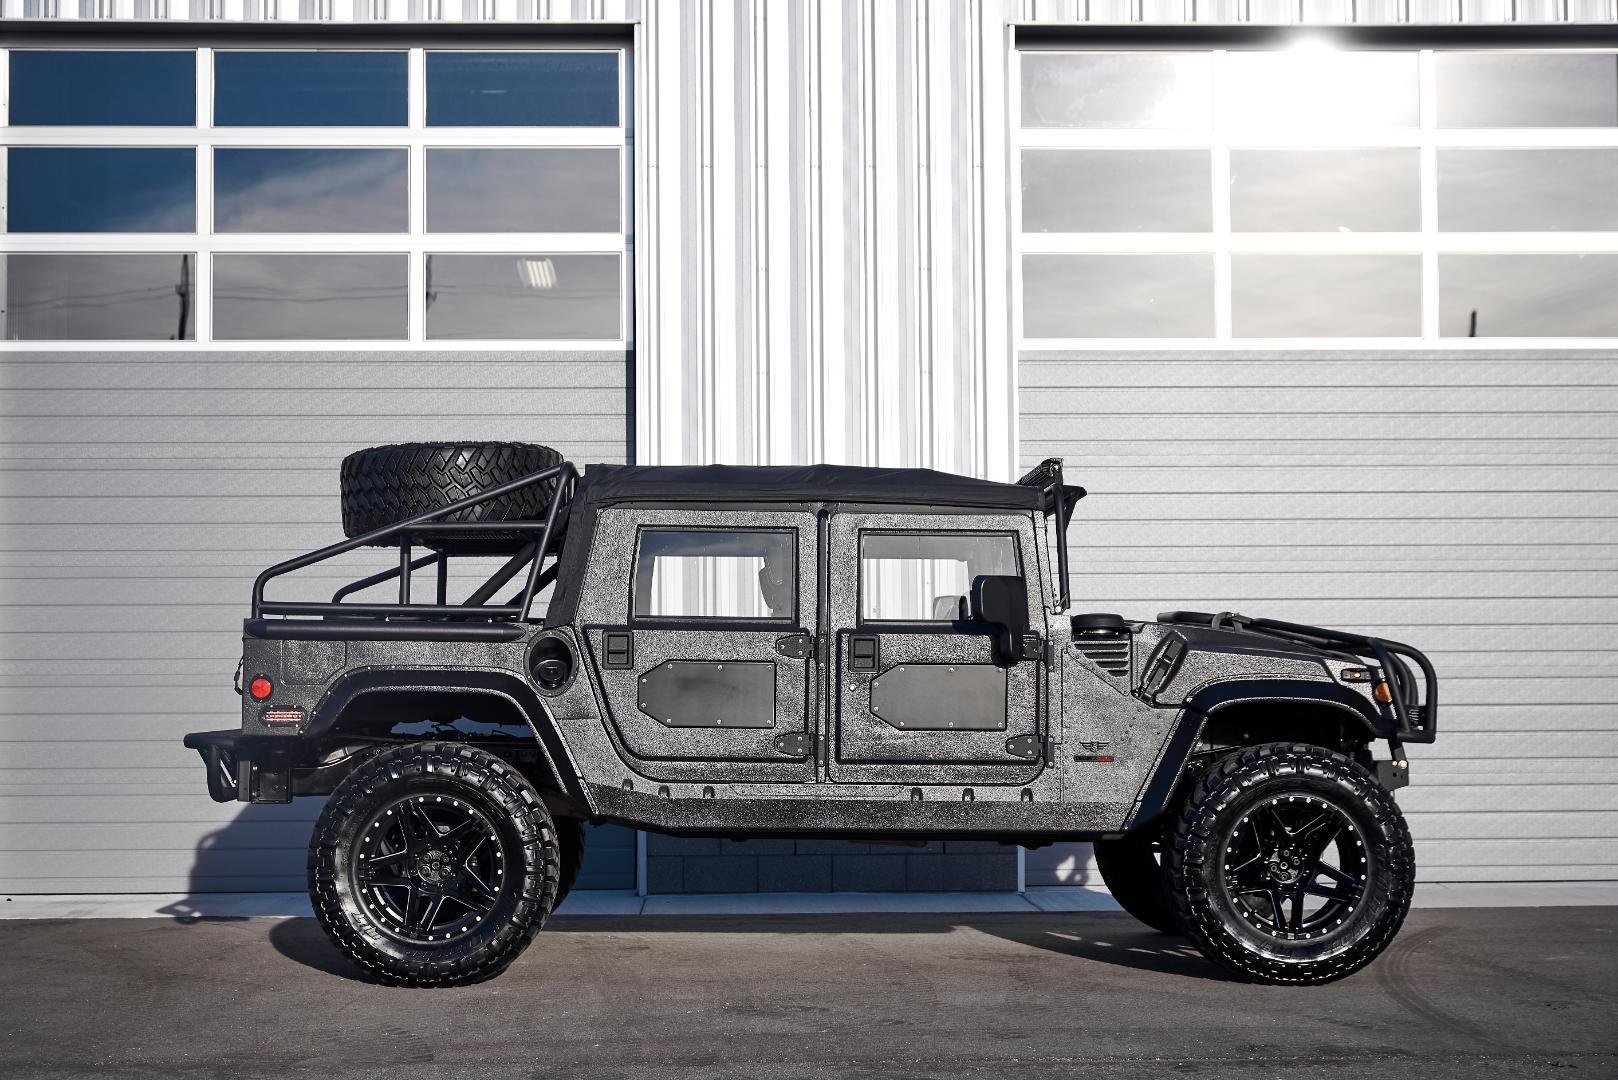 This is Mil-Spec Automotive's $412,000 Hummer H1